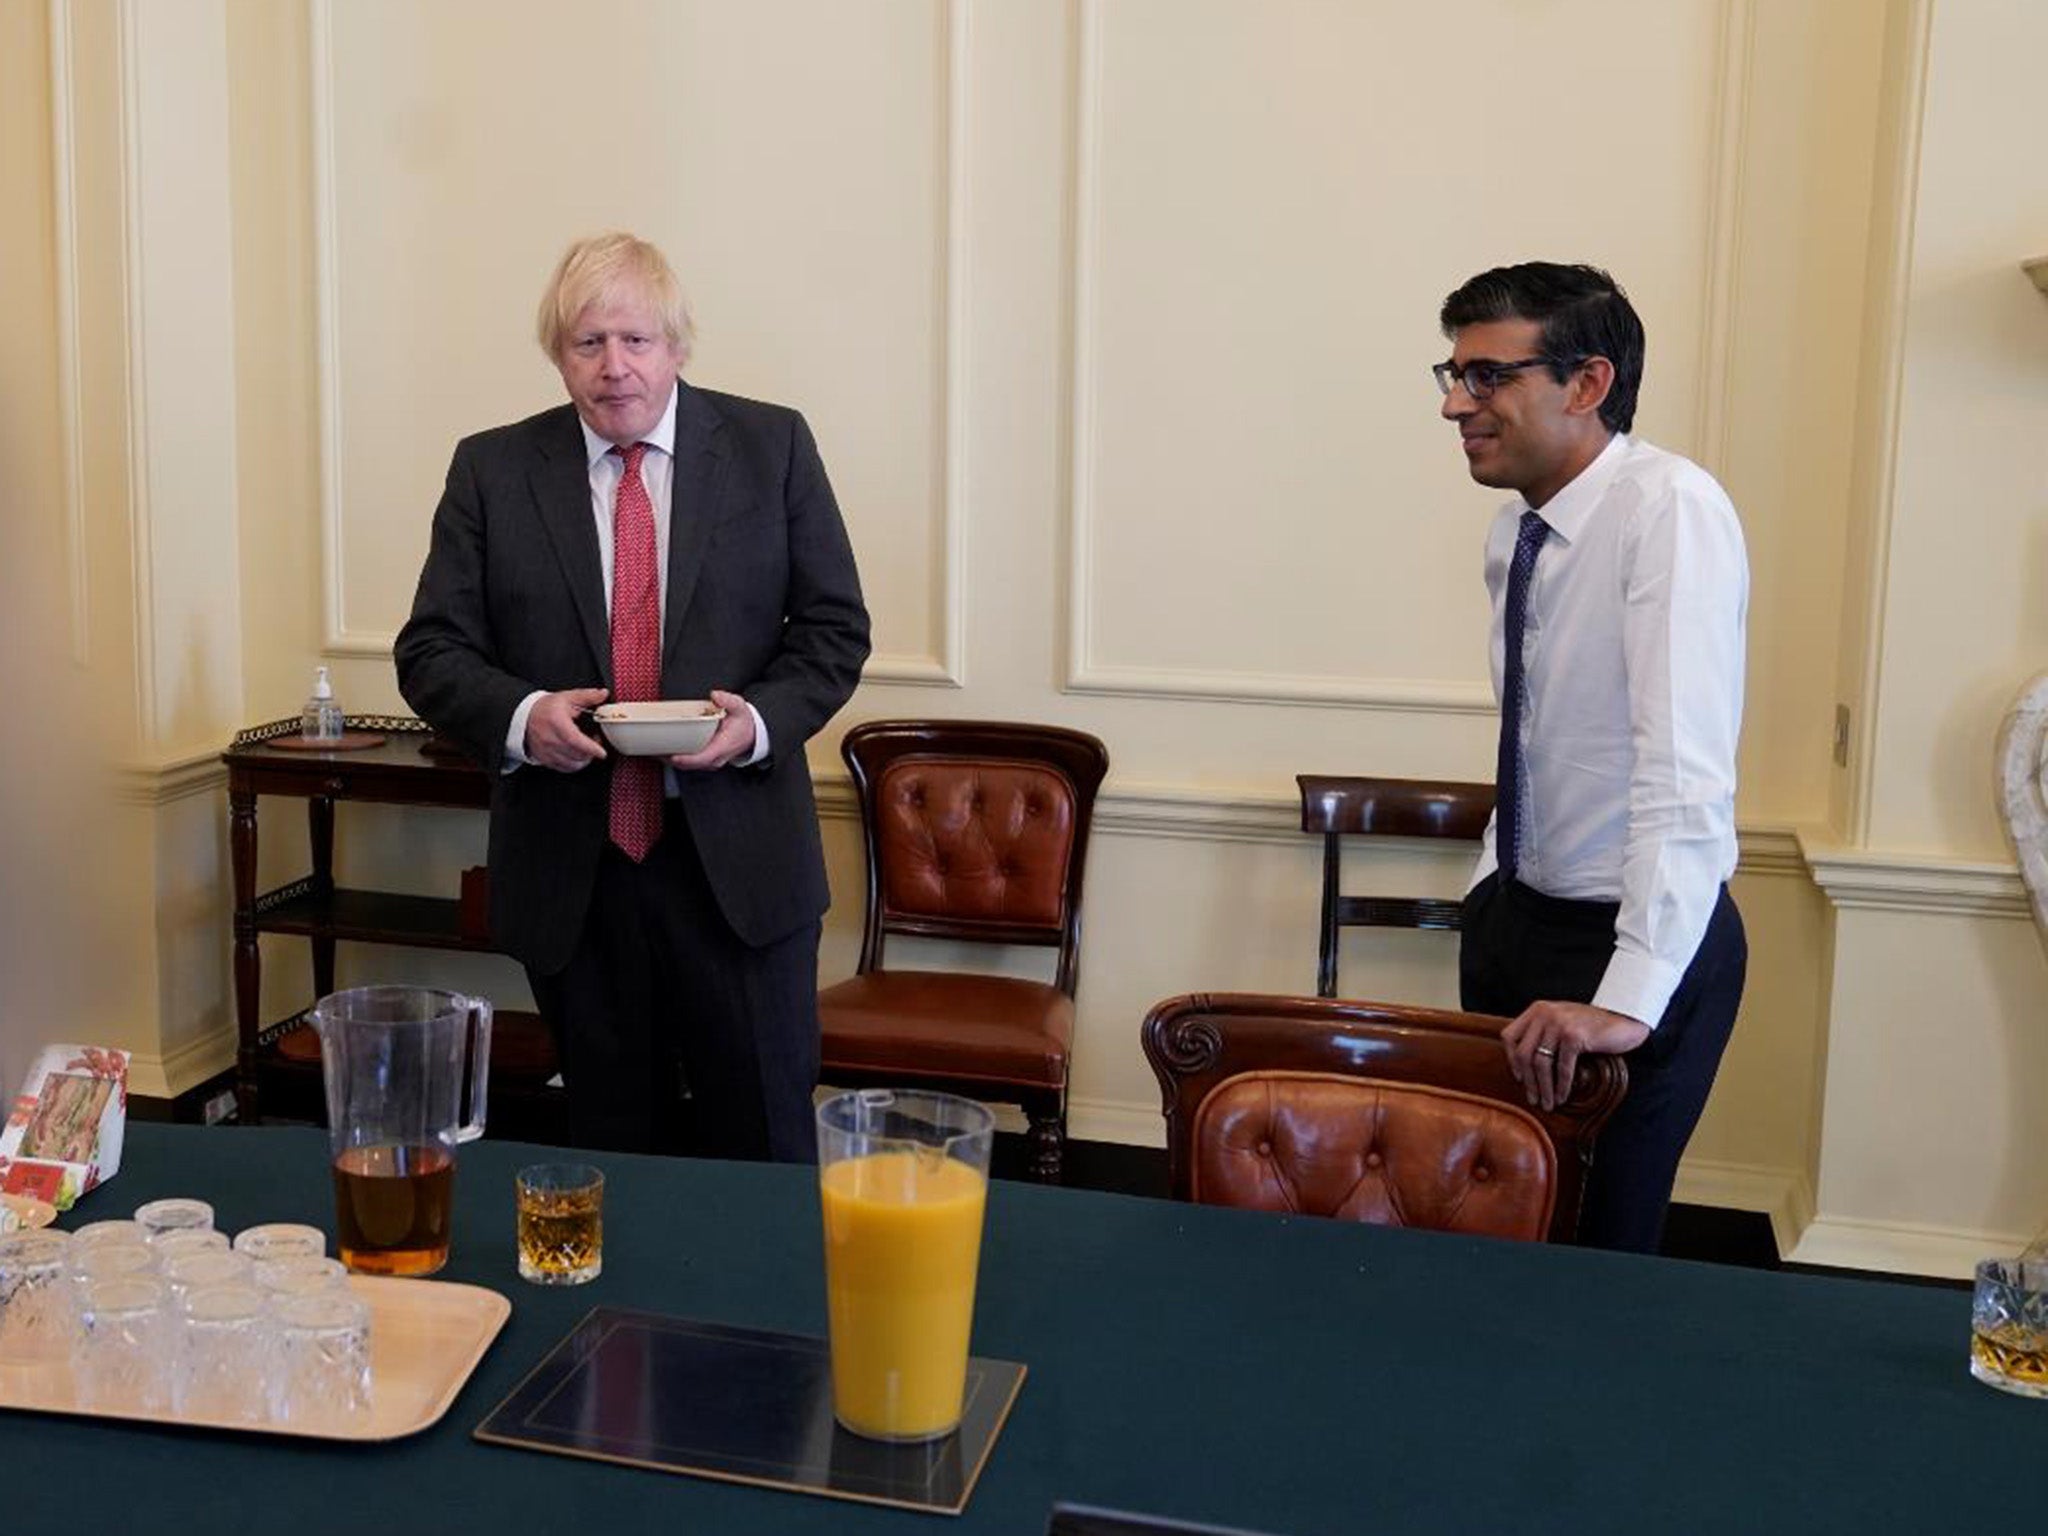 The then prime minister Boris Johnson (left), with then chancellor of the exchequer Rishi Sunak, at a gathering in the Cabinet Room in 10 Downing Street on his birthday, which was released with the publication of Sue's Gray report into Downing Street parties in Whitehall during the coronavirus lockdown